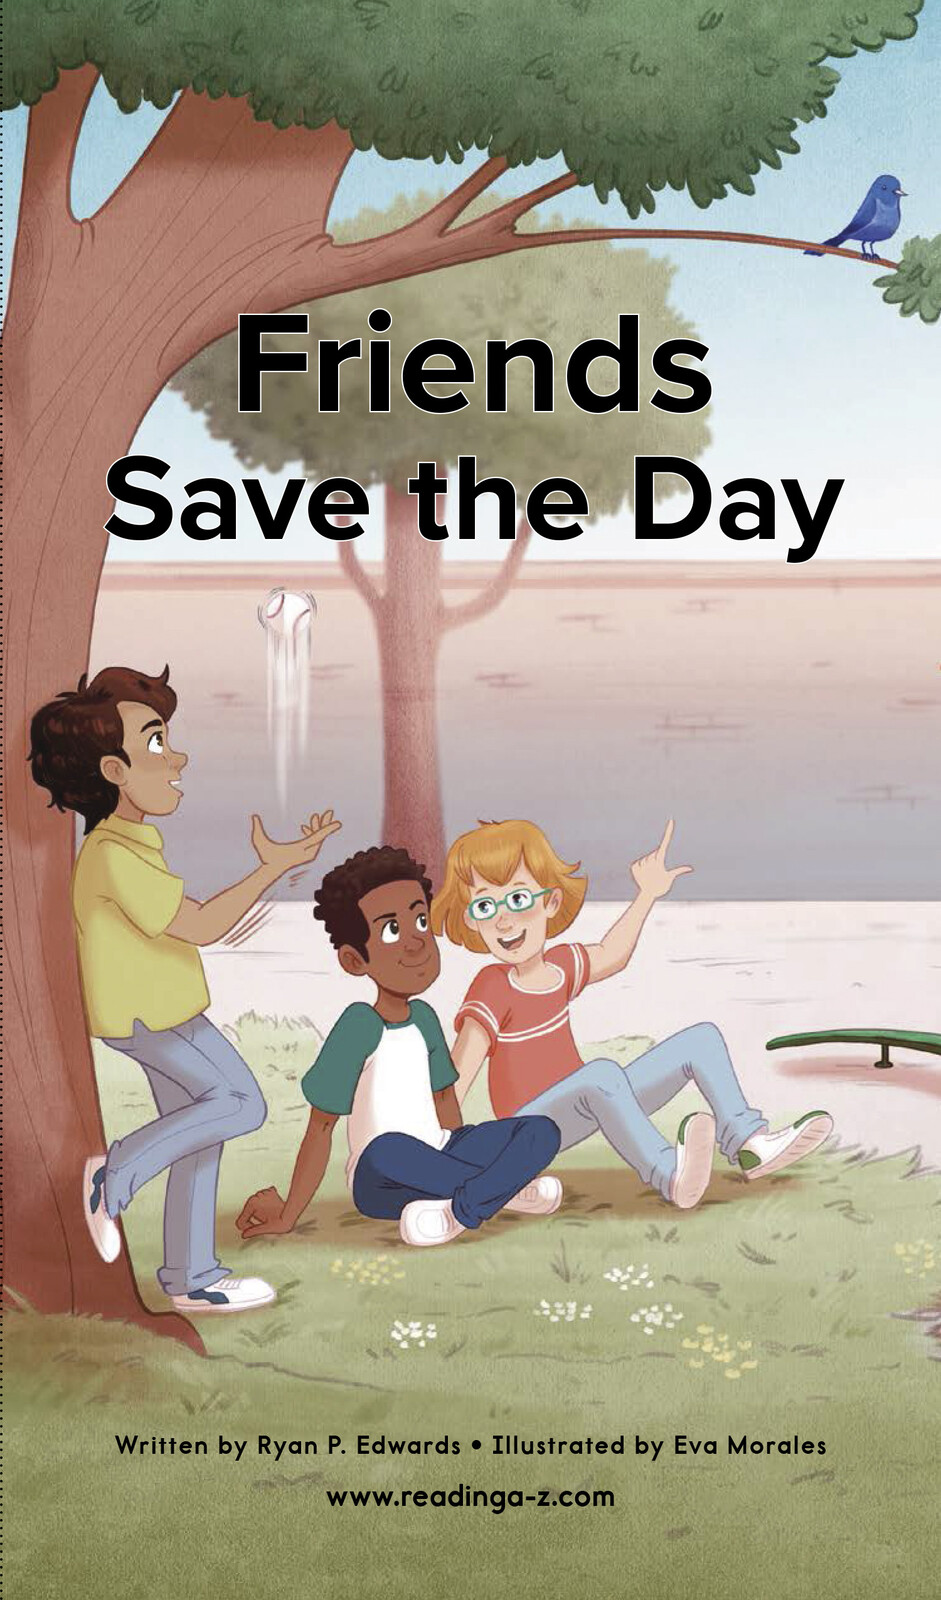 "Friends Save the day" by ©Reading A_Z
Author: Ryan P. Edwards
Illustrator: Eva Morales
Publisher: ©Reading A_Z (2022)
Languaje: English